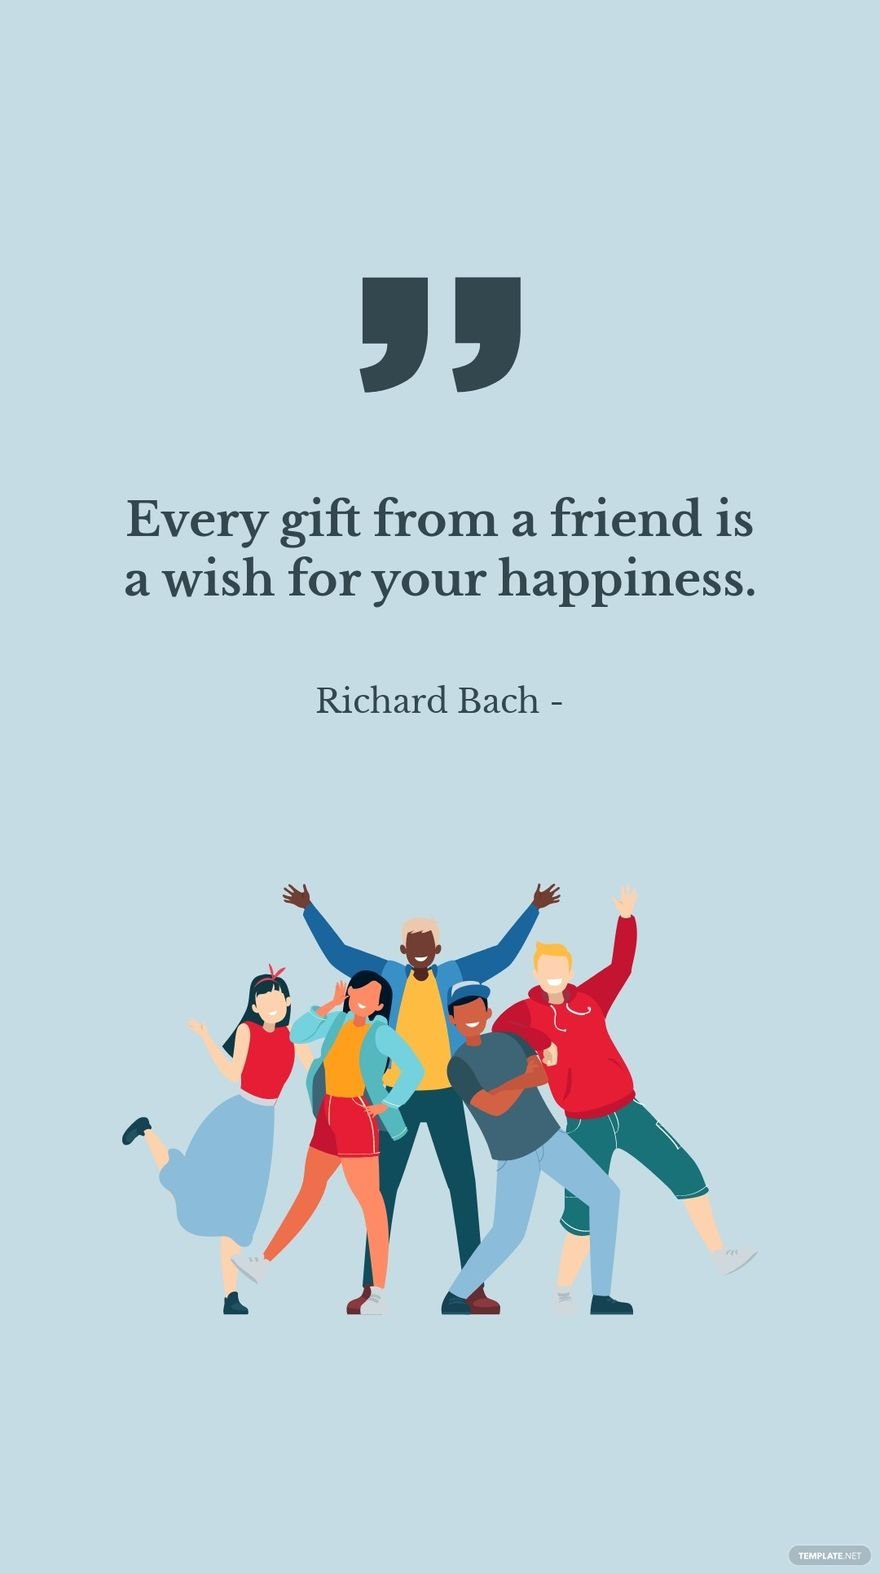 Free Richard Bach - Every gift from a friend is a wish for your happiness. in JPG